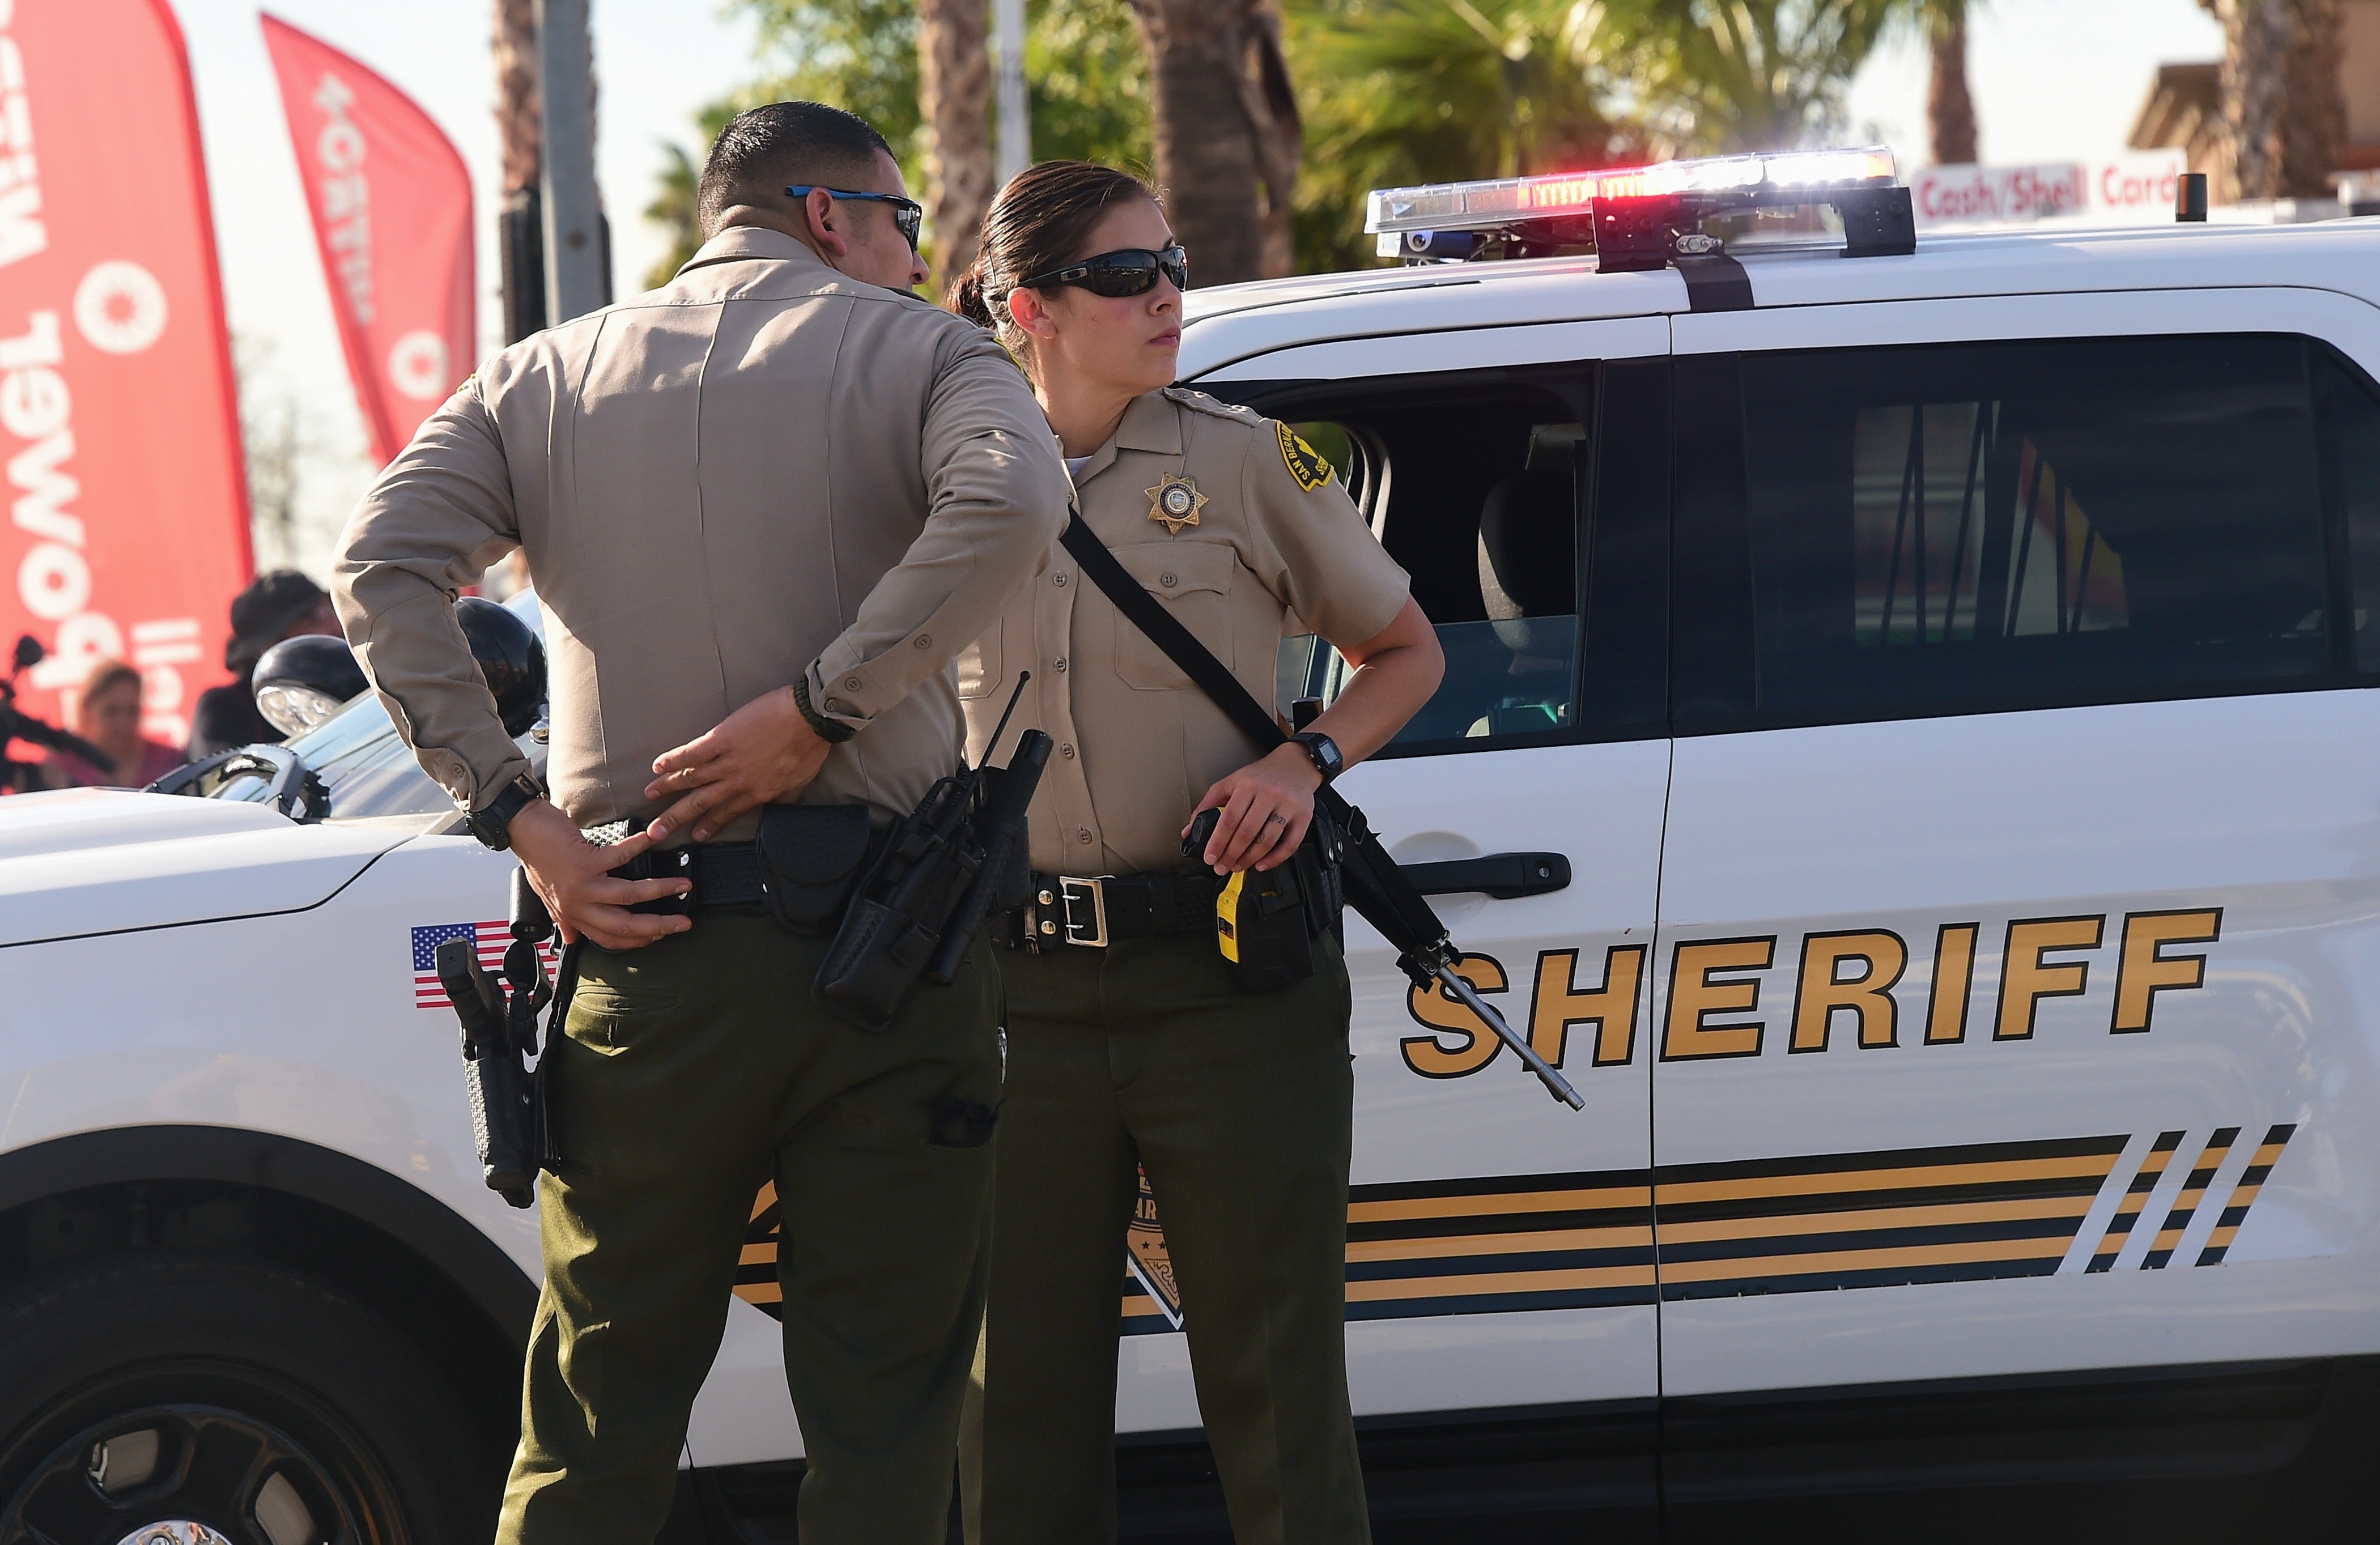 Armed officers from the Sheriff’s department on patrol near the scene of the crime in San Bernardino, California